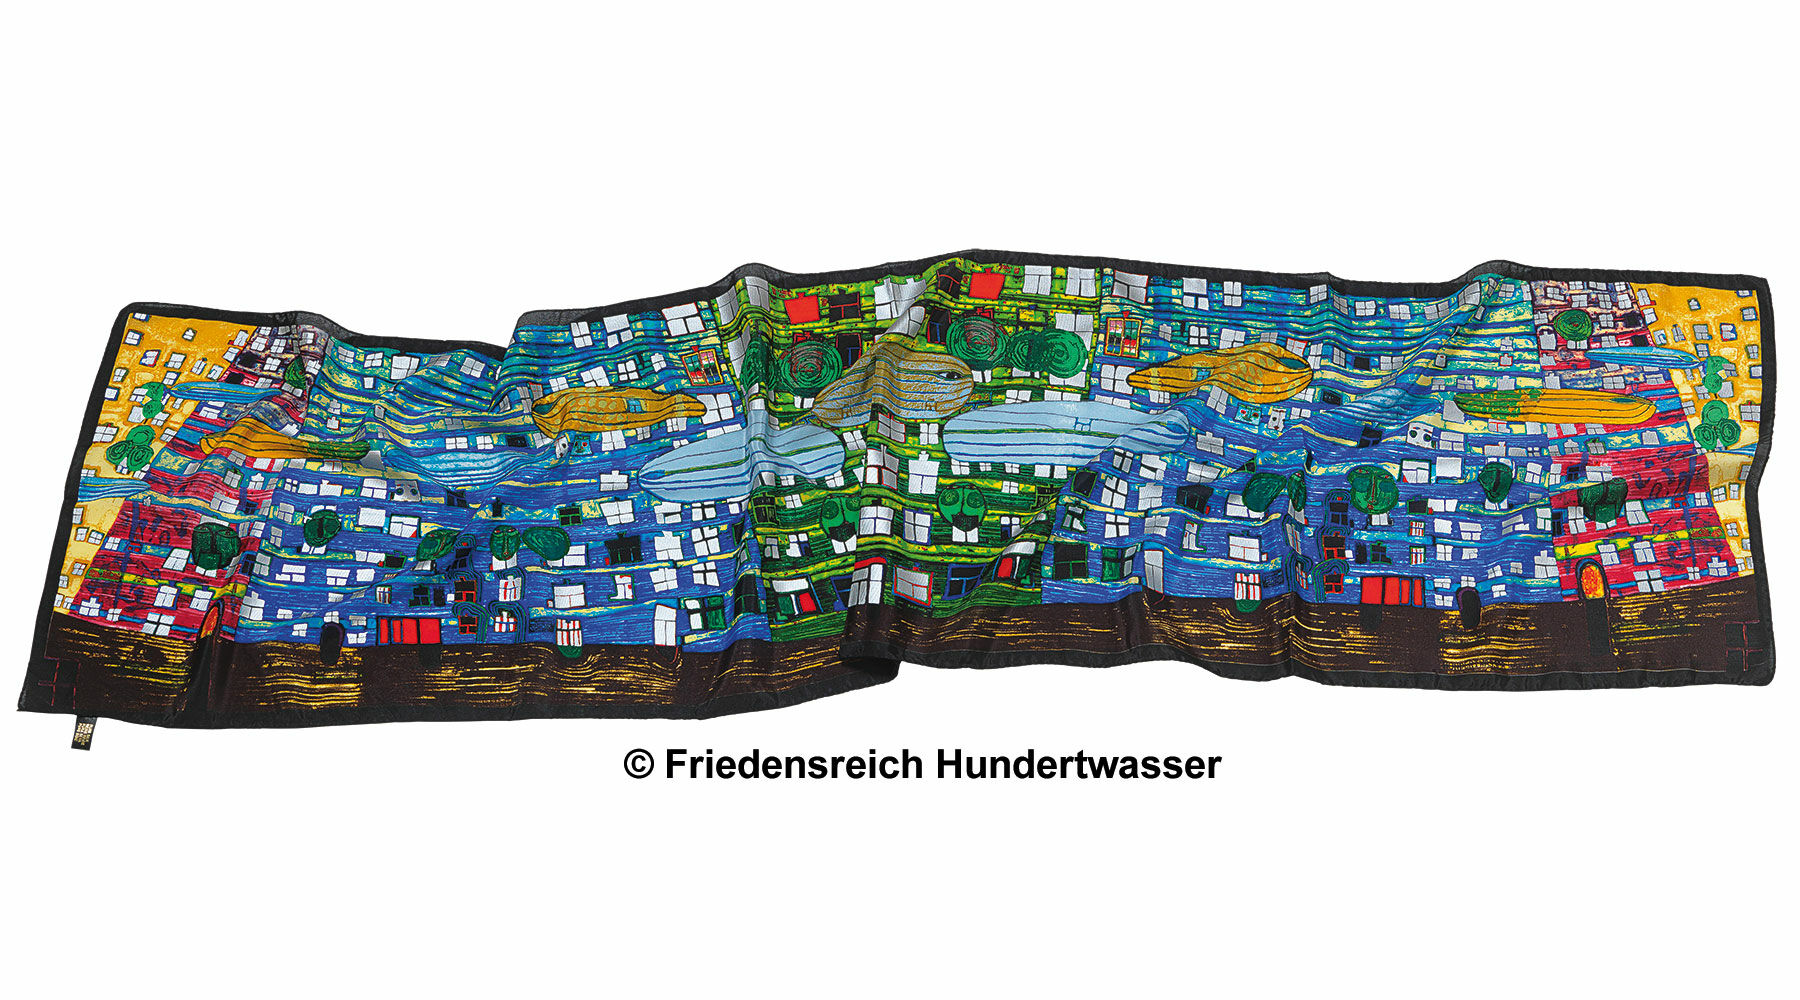 (777) Scarf "Song of the Whales" by Friedensreich Hundertwasser